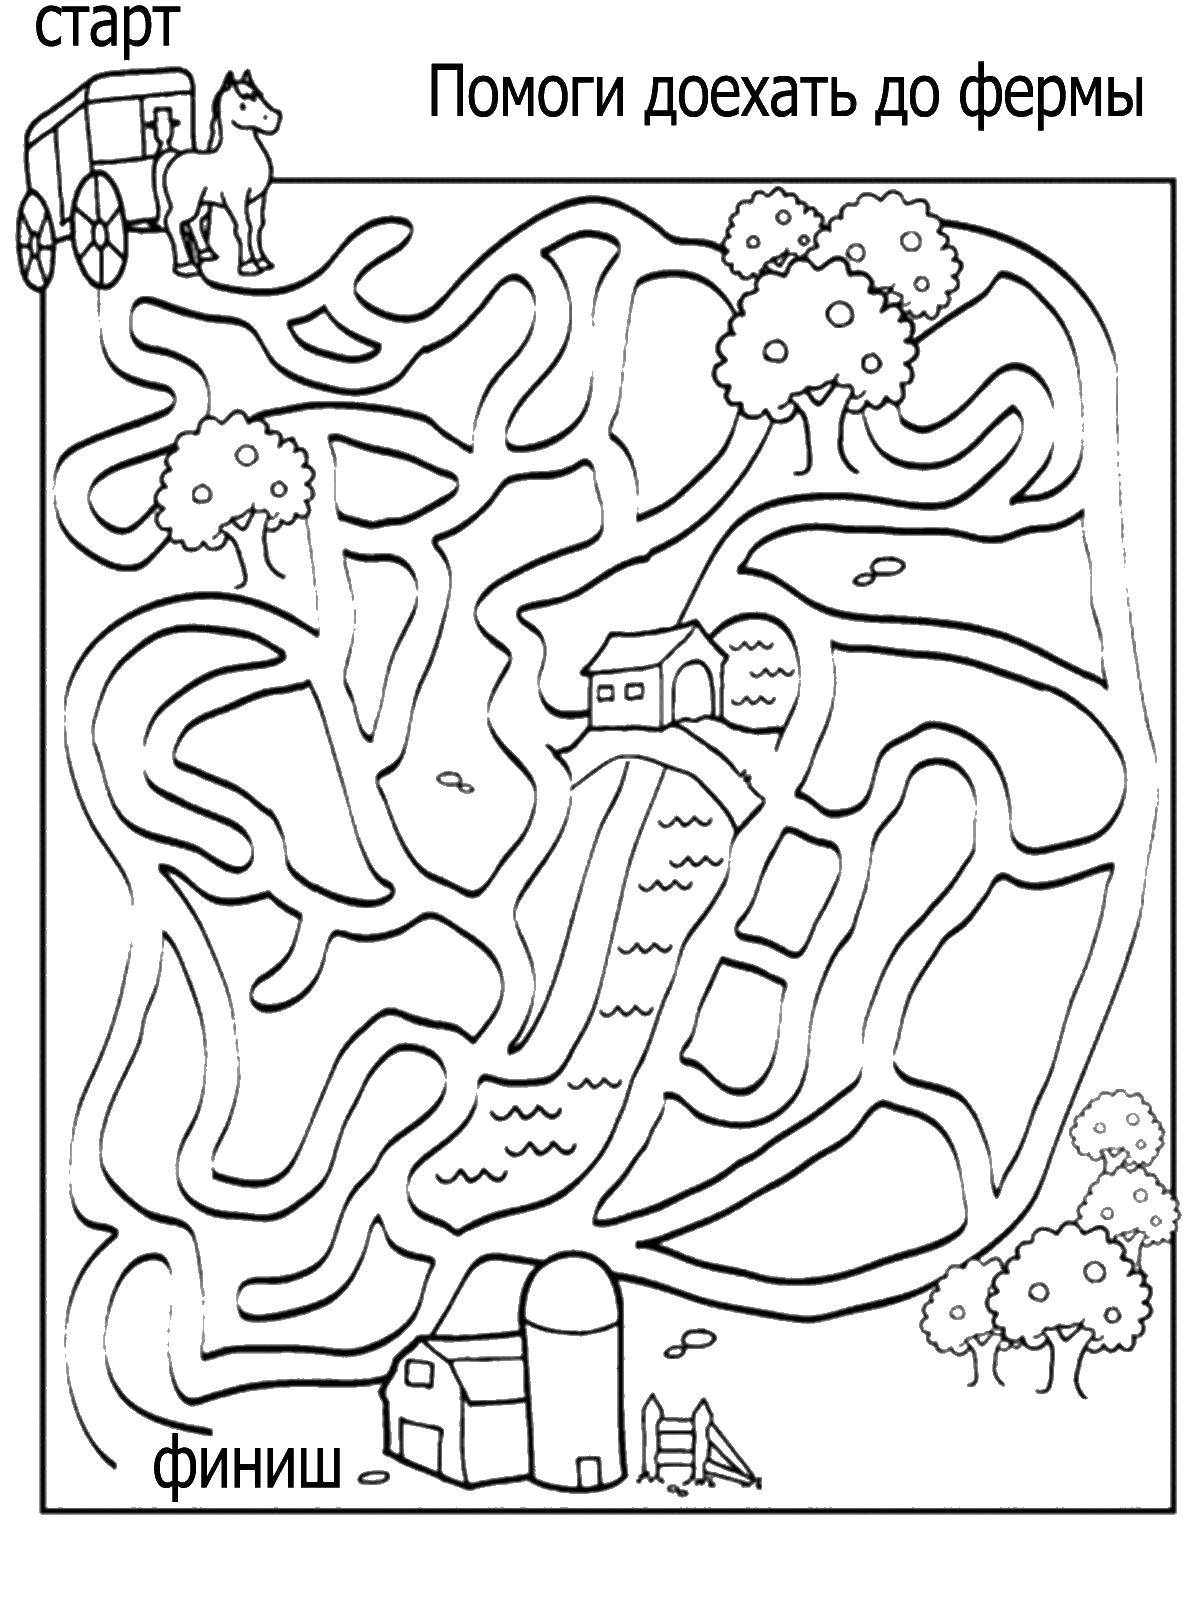 Coloring Coloring book-mystery. Category Riddles. Tags:  on thinking, coloring, puzzle.